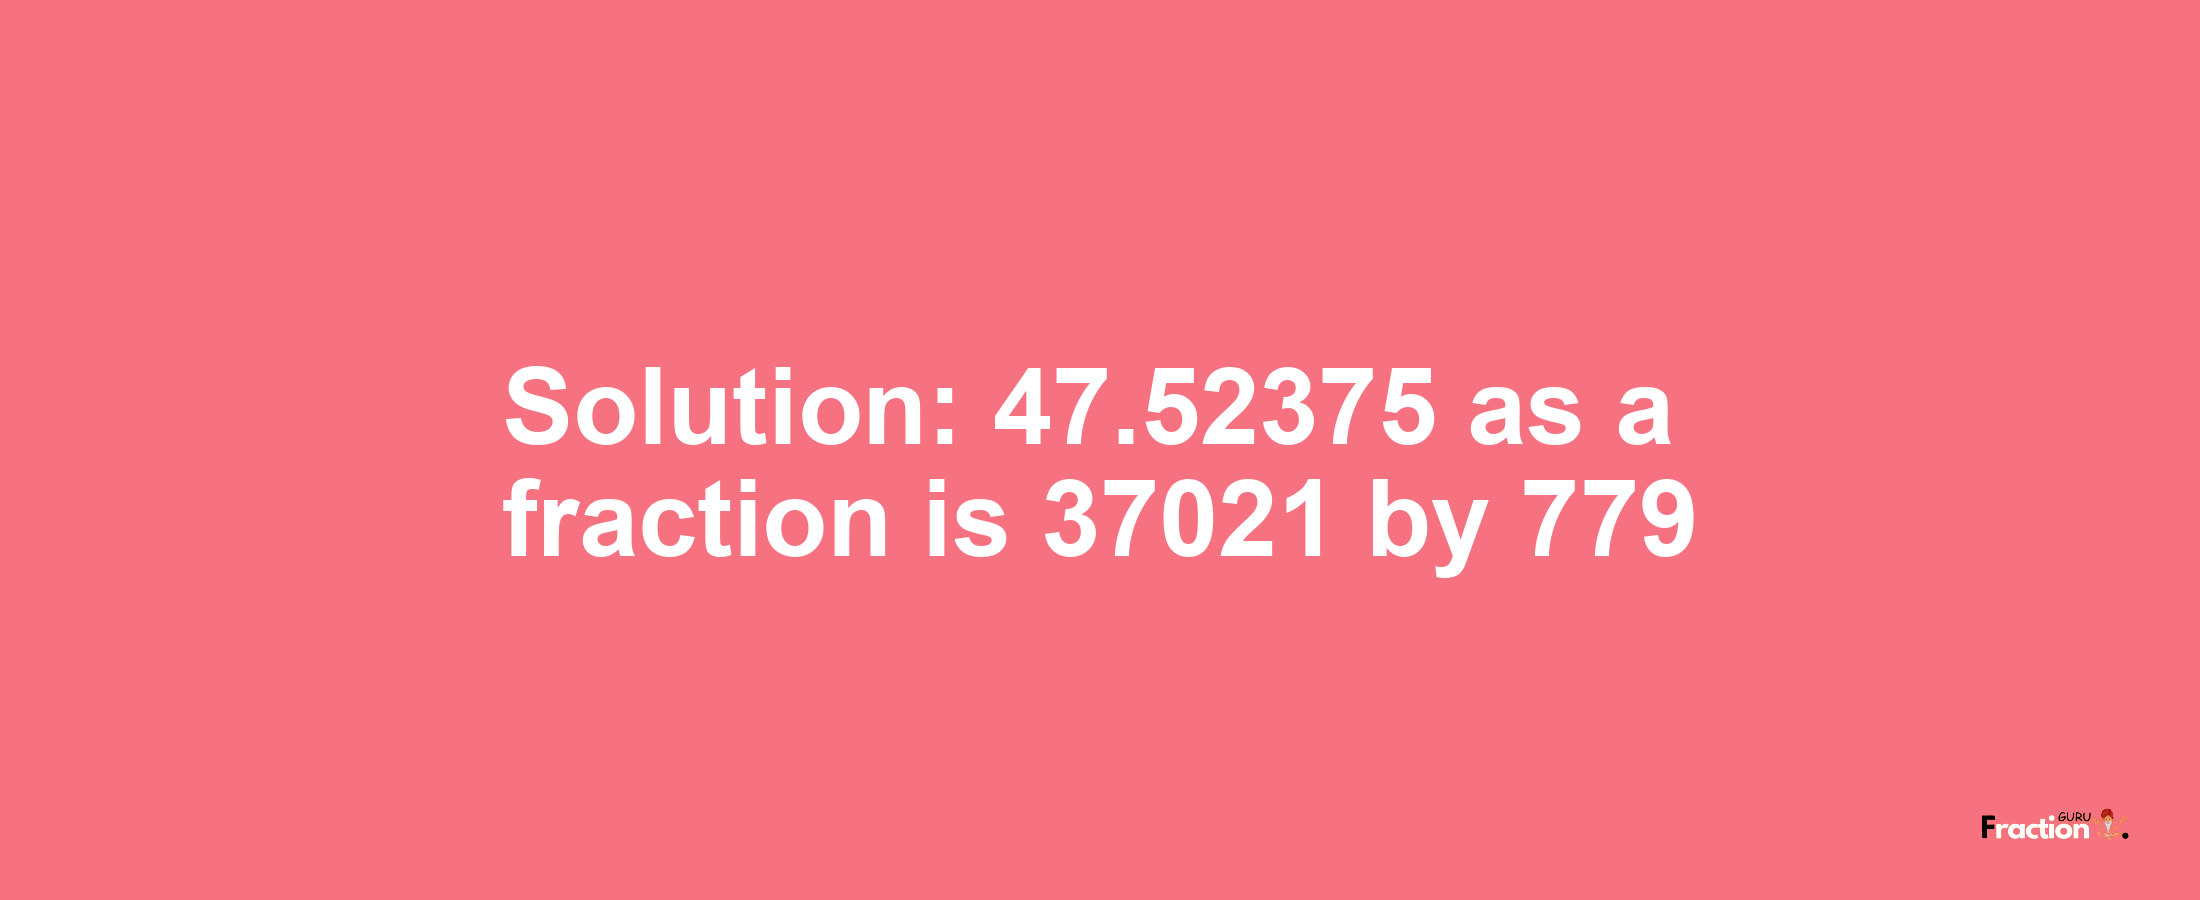 Solution:47.52375 as a fraction is 37021/779